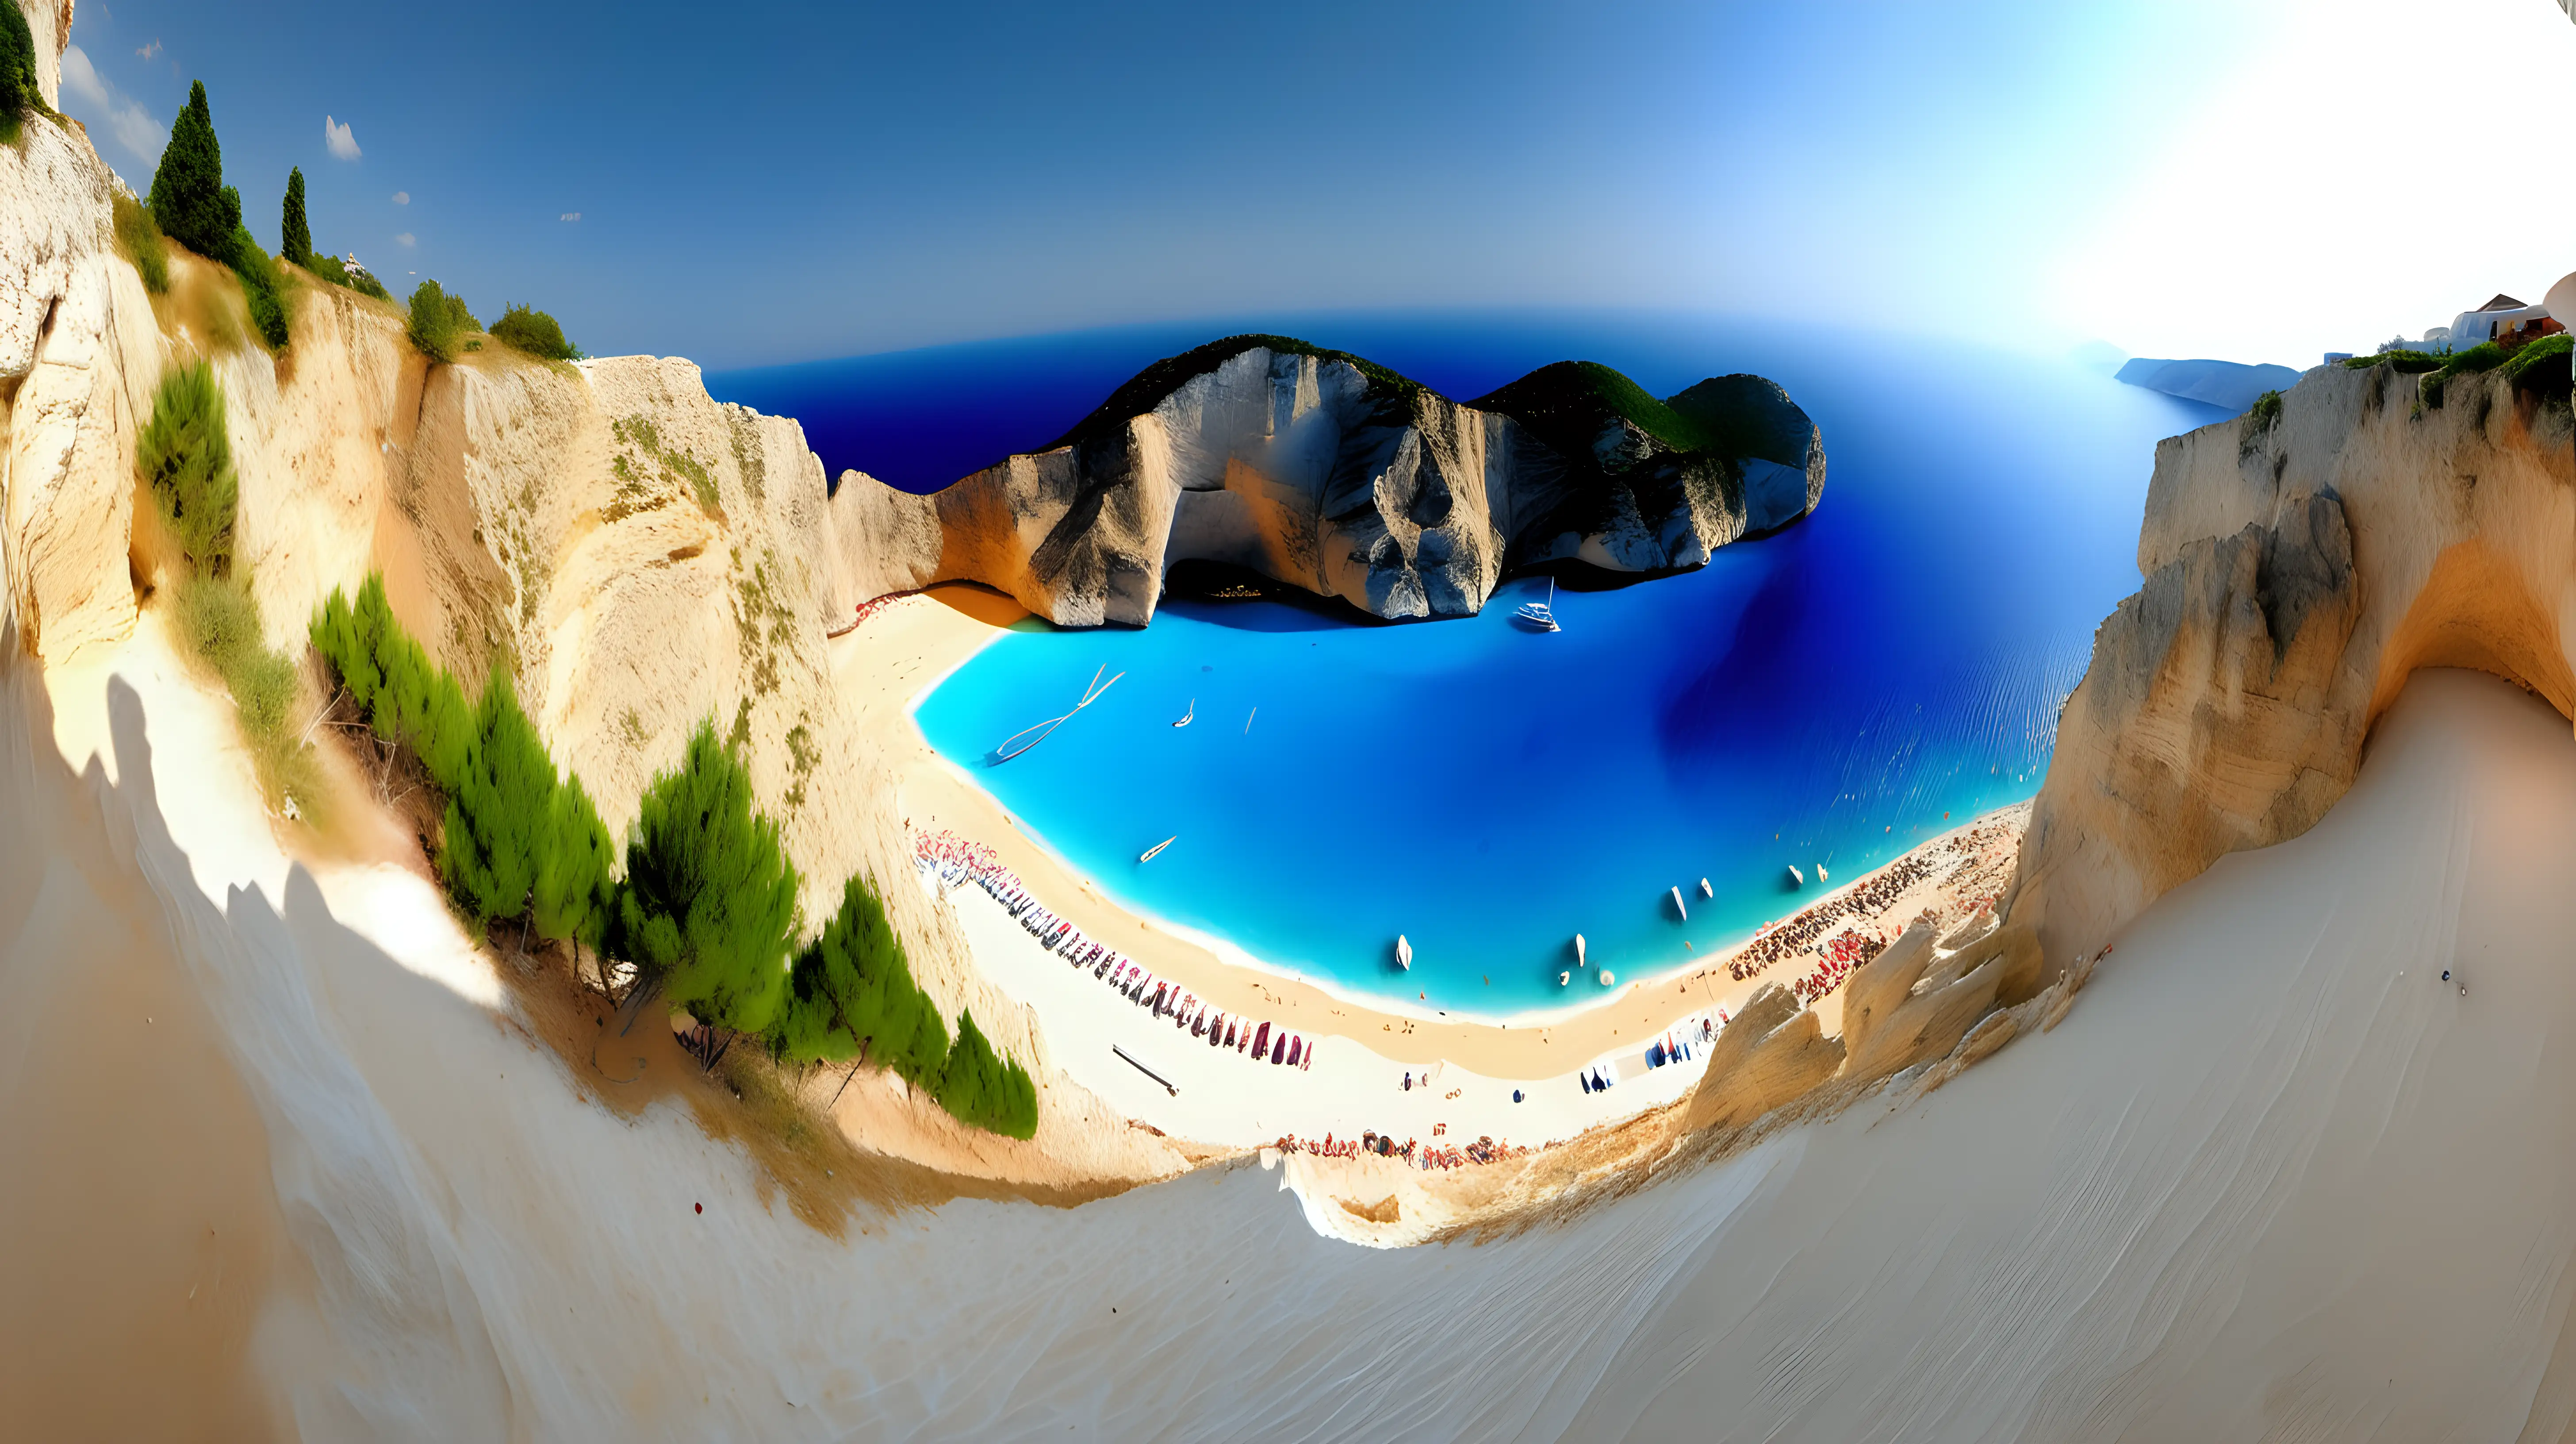 show Navagio Beach, Greece at its best shape and show its beauty roylaty and greatness,a wide angle image showing Navagio Beach, Greece at its peak beauty